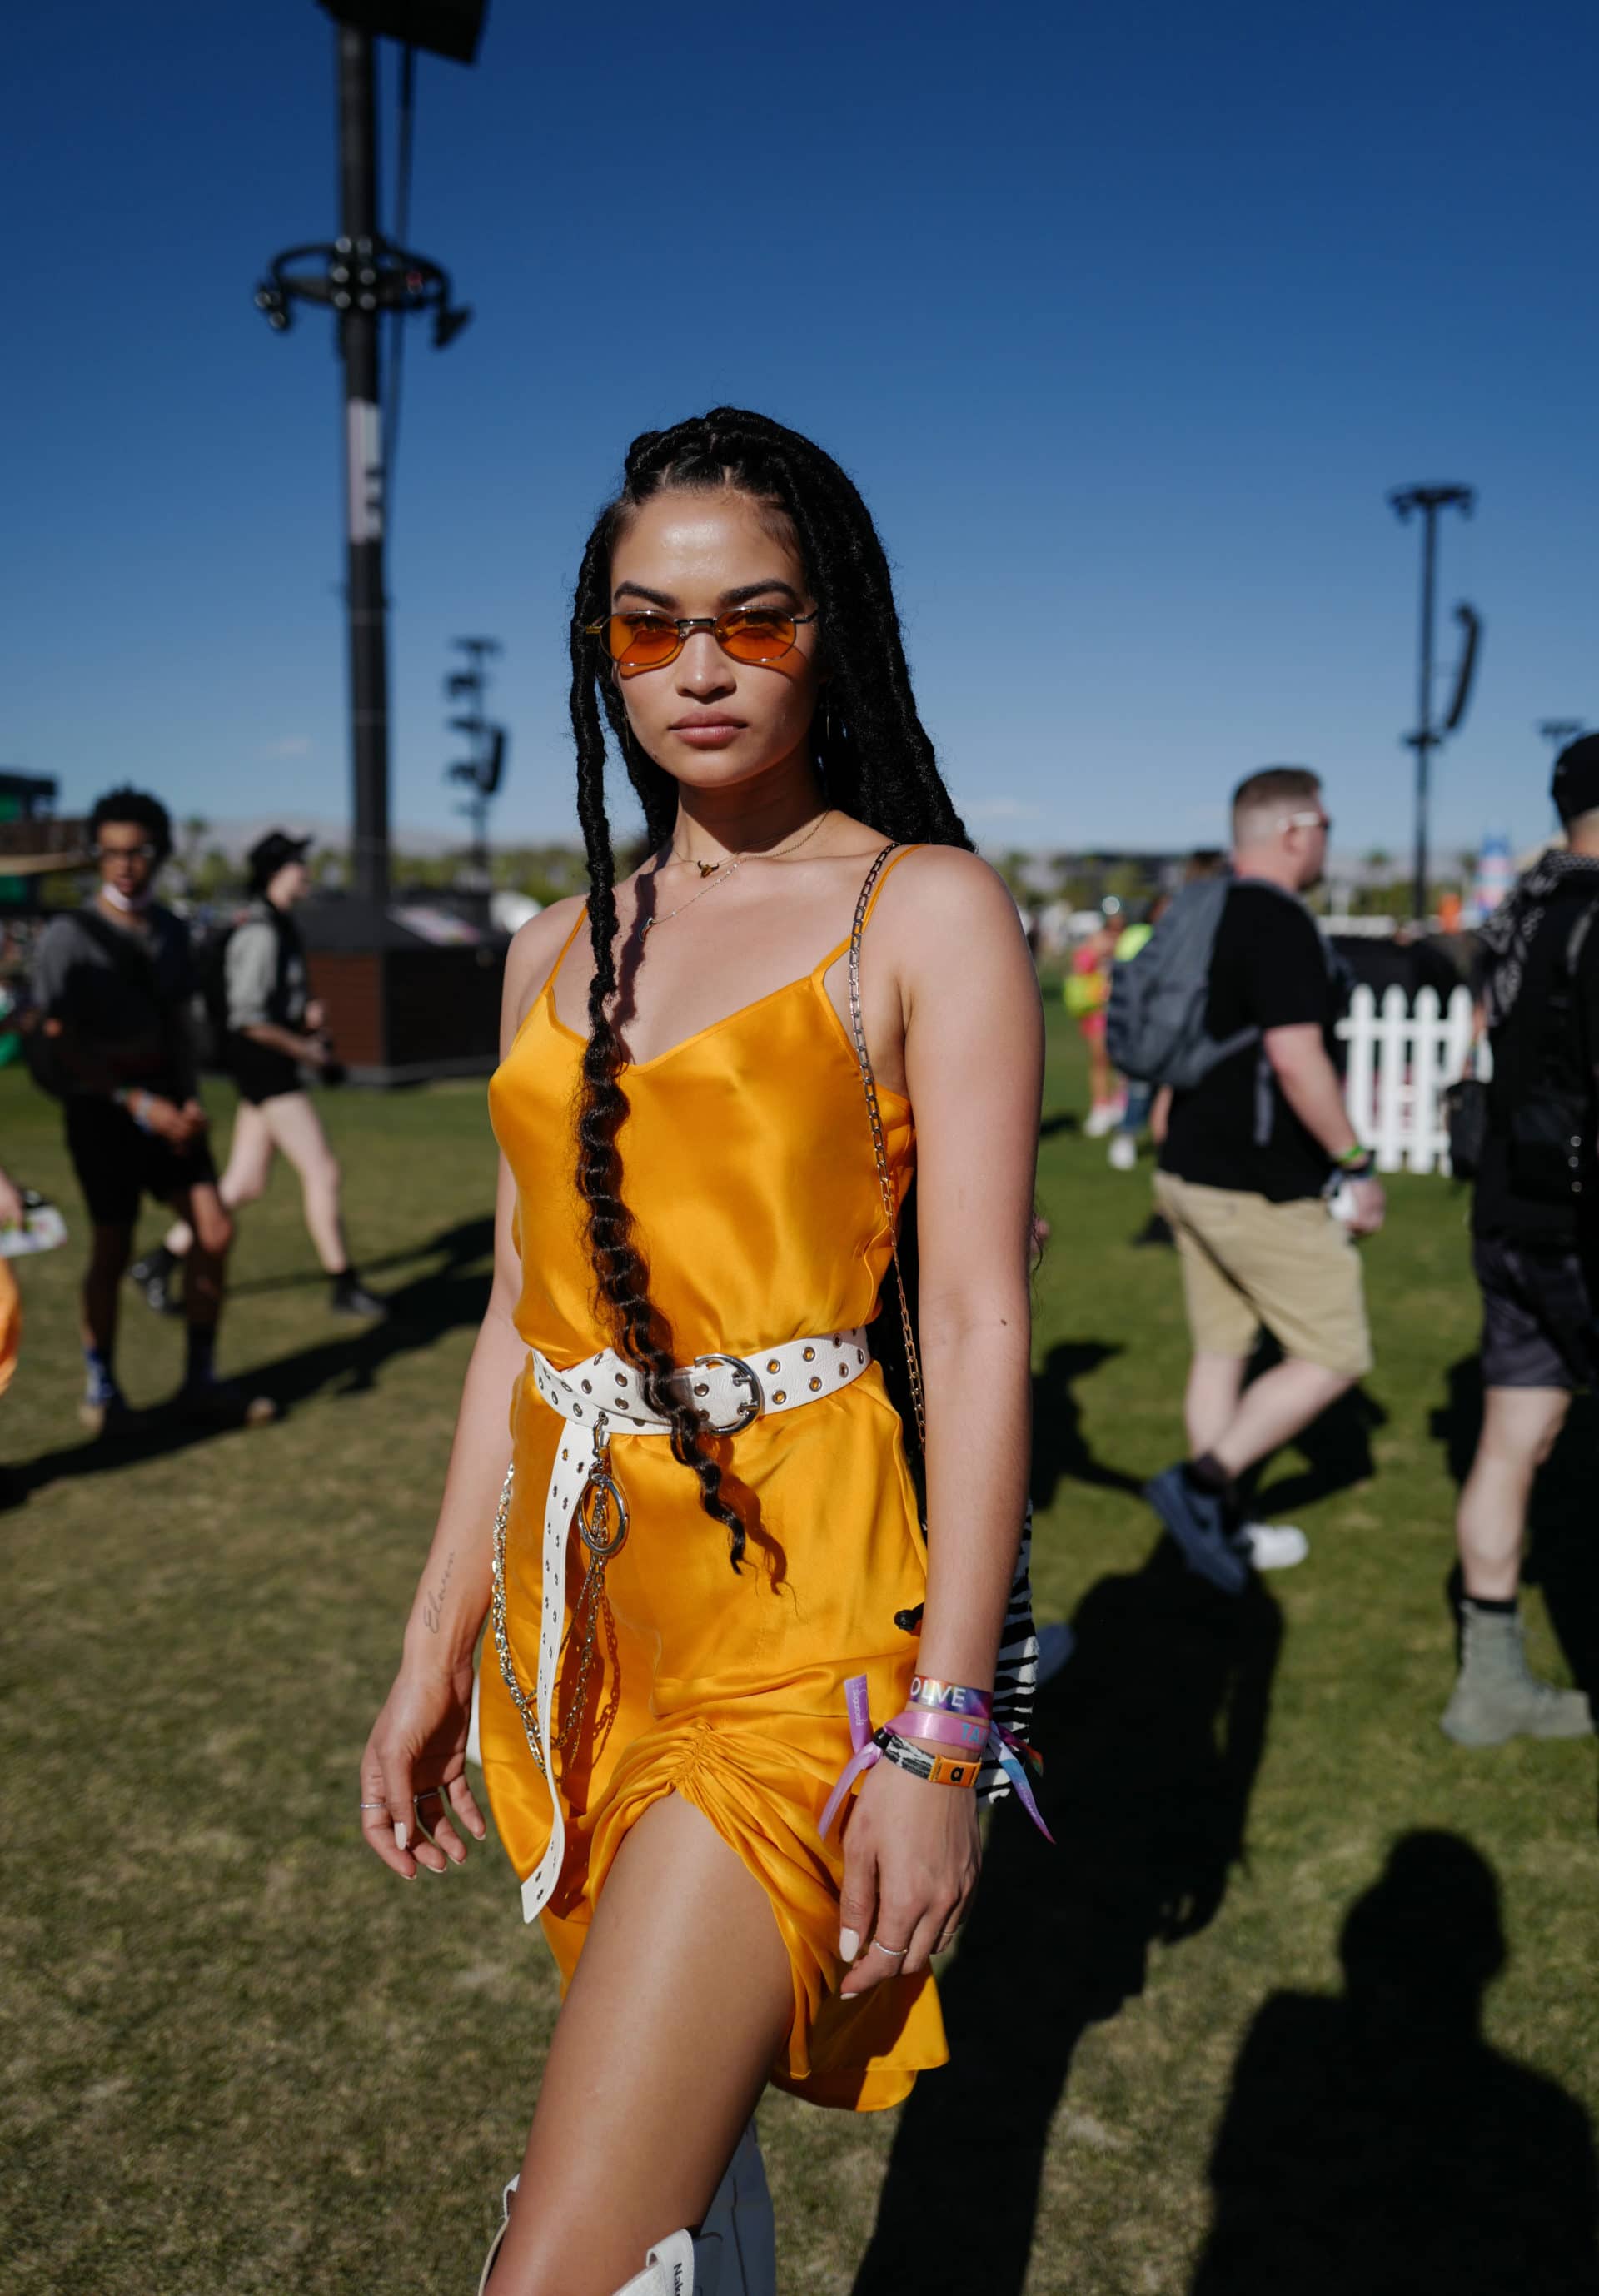 Salt n Peppa, Lena Waithe, Normani And More Celebs Out And About